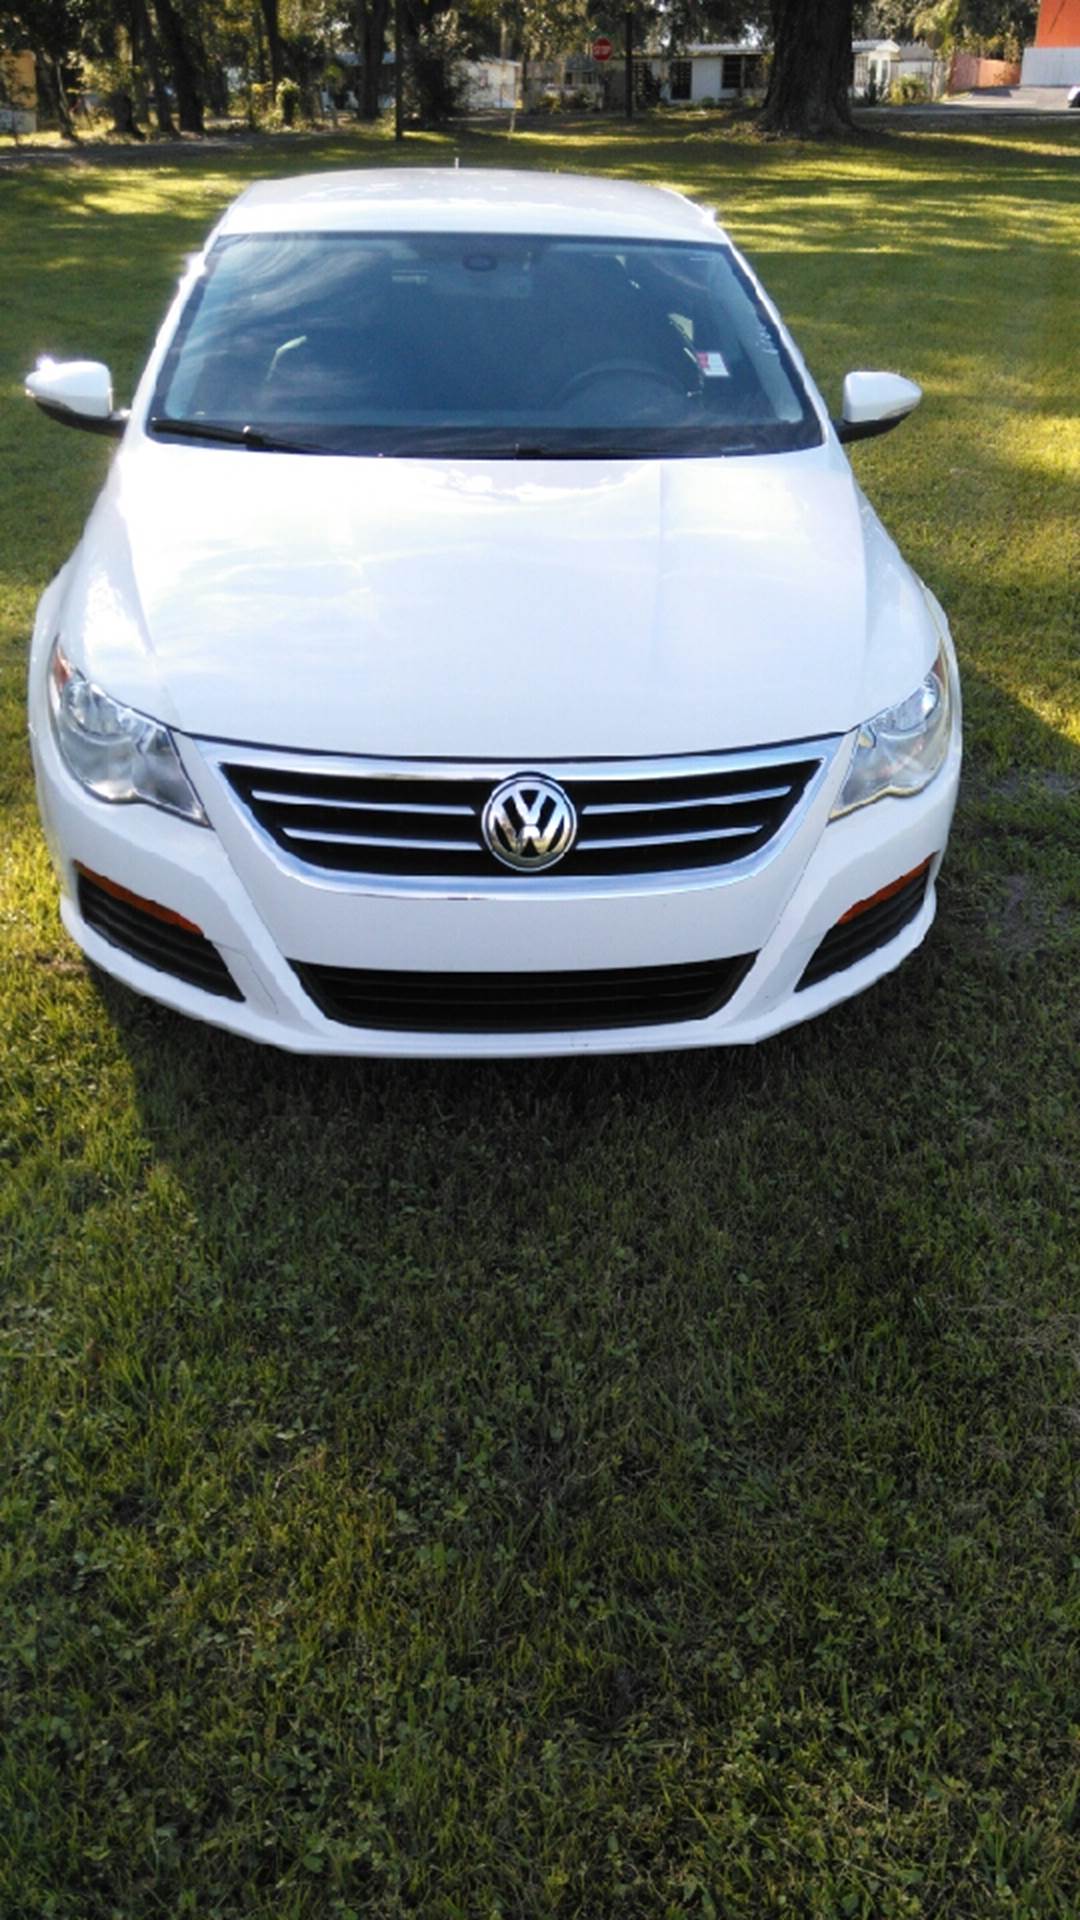 2012 Volkswagen CC for sale at GREAT AUTO DEALS SALES INC in Kissimmee FL